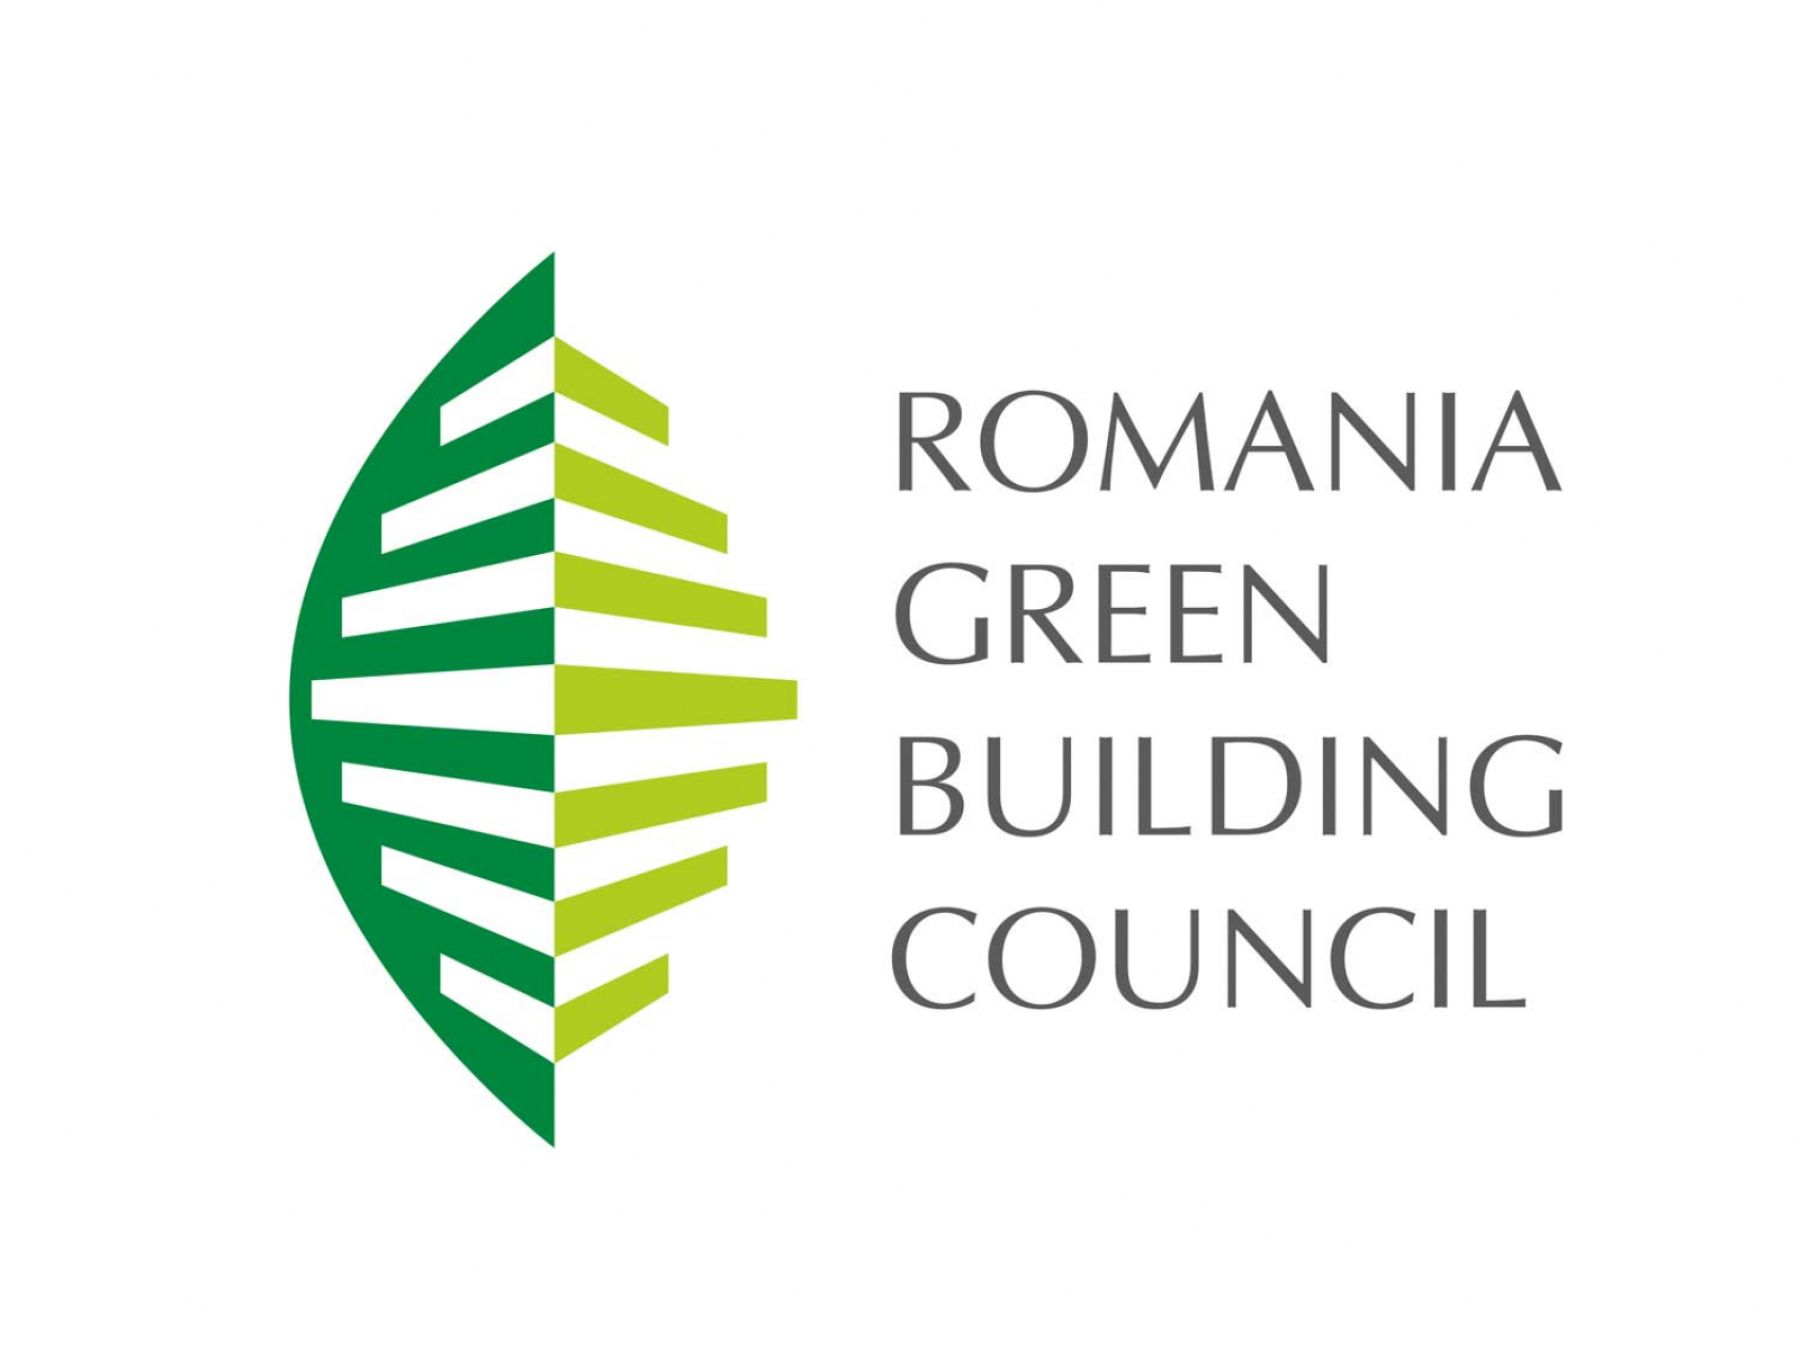 Romania Green Building Council - Letter of Recognition